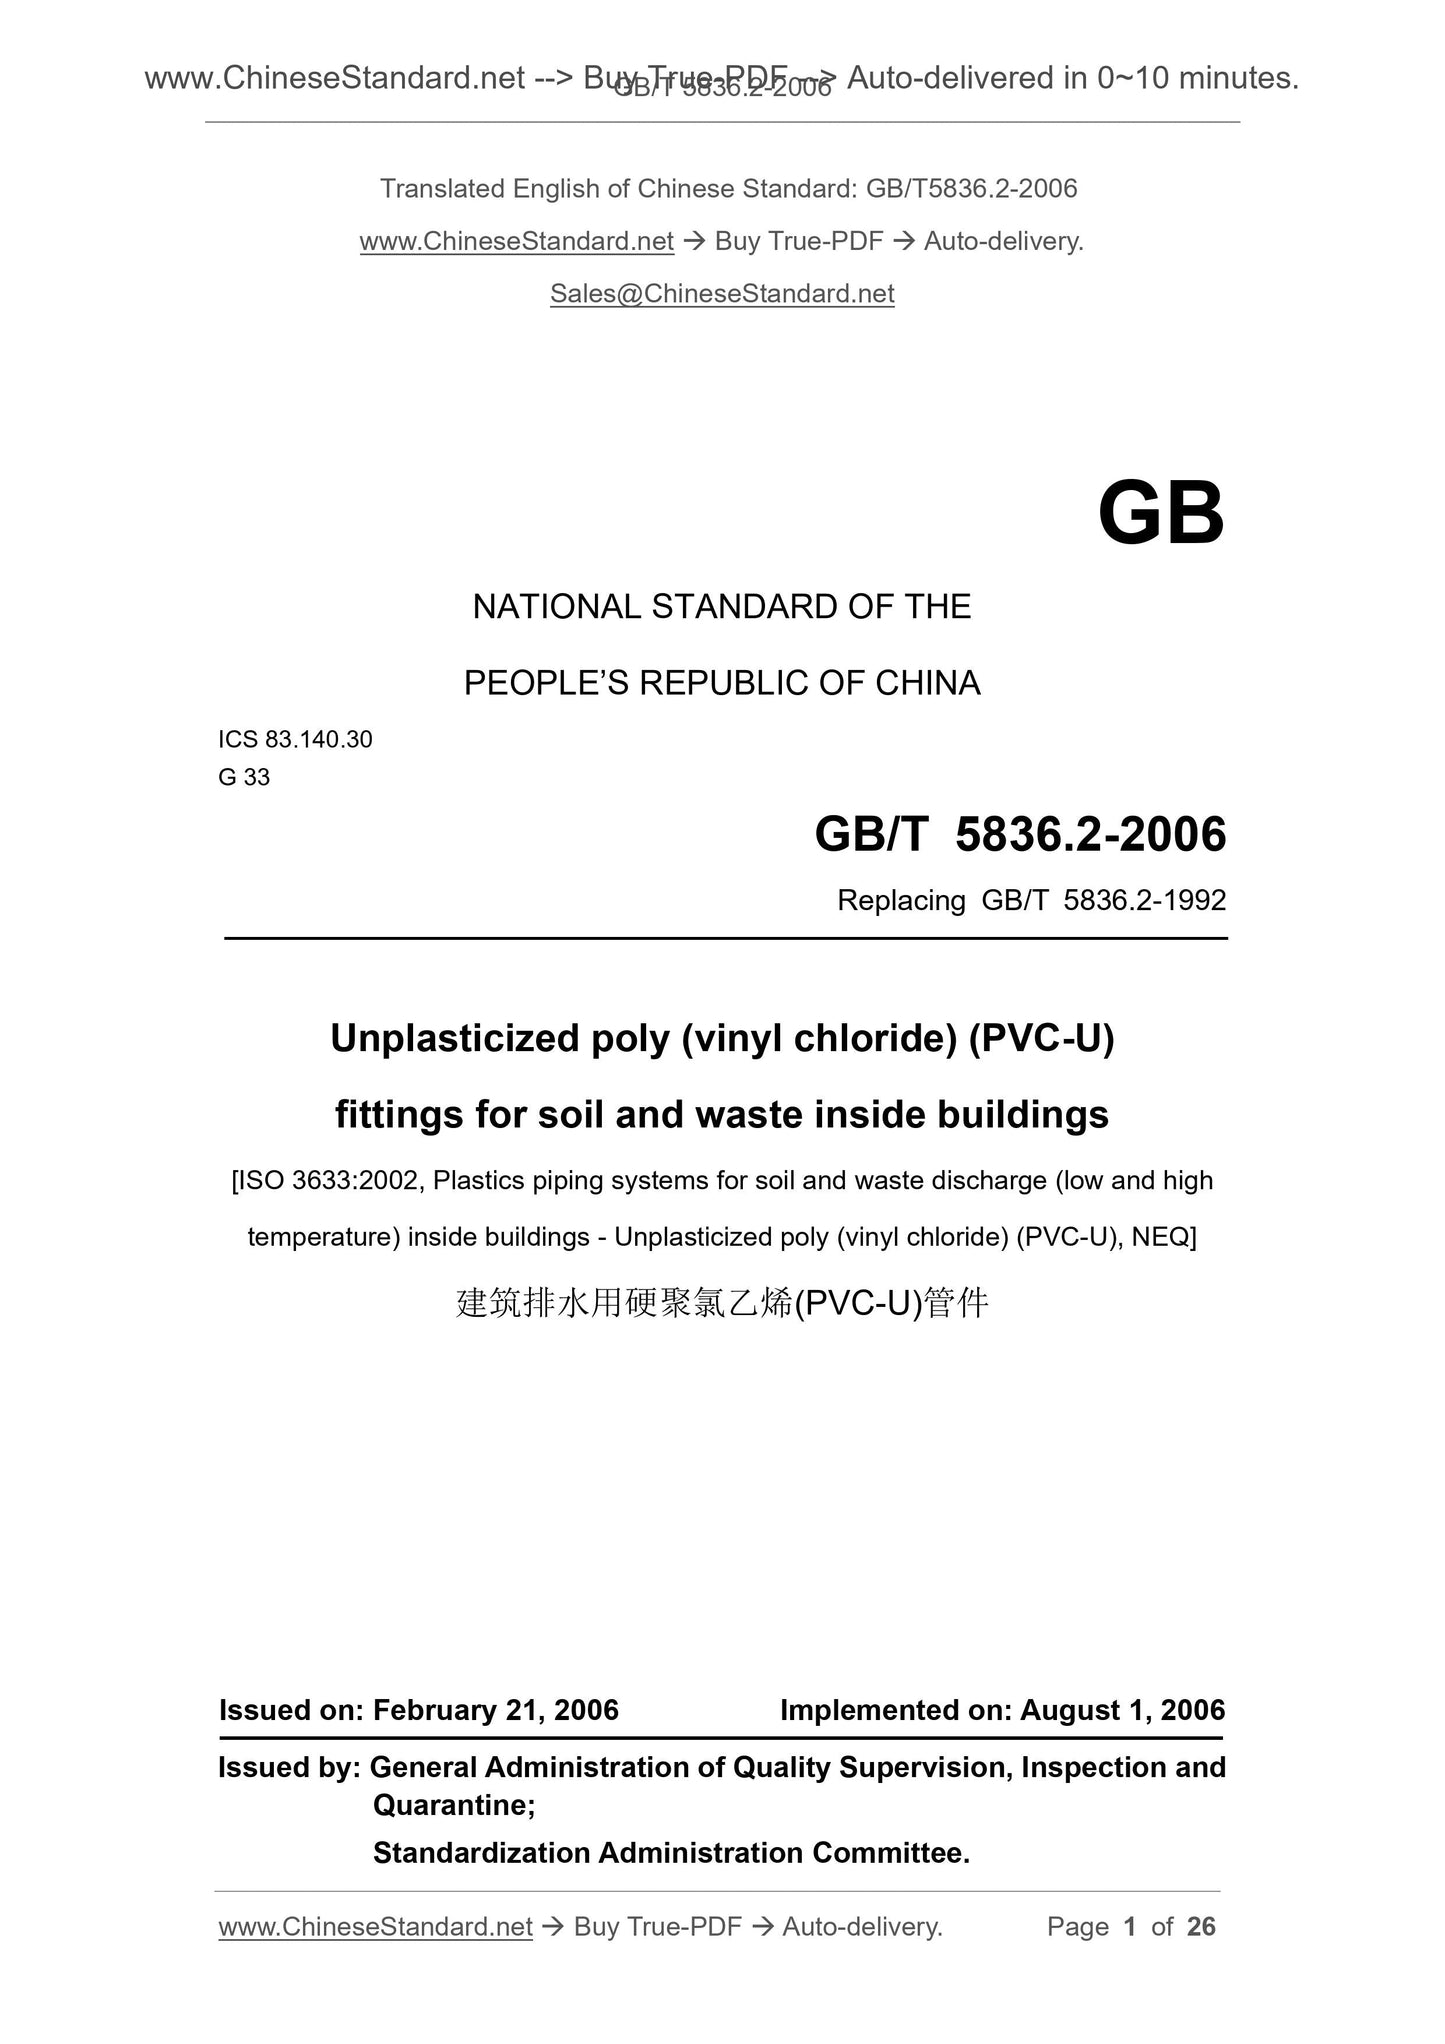 GB/T 5836.2-2006 Page 1